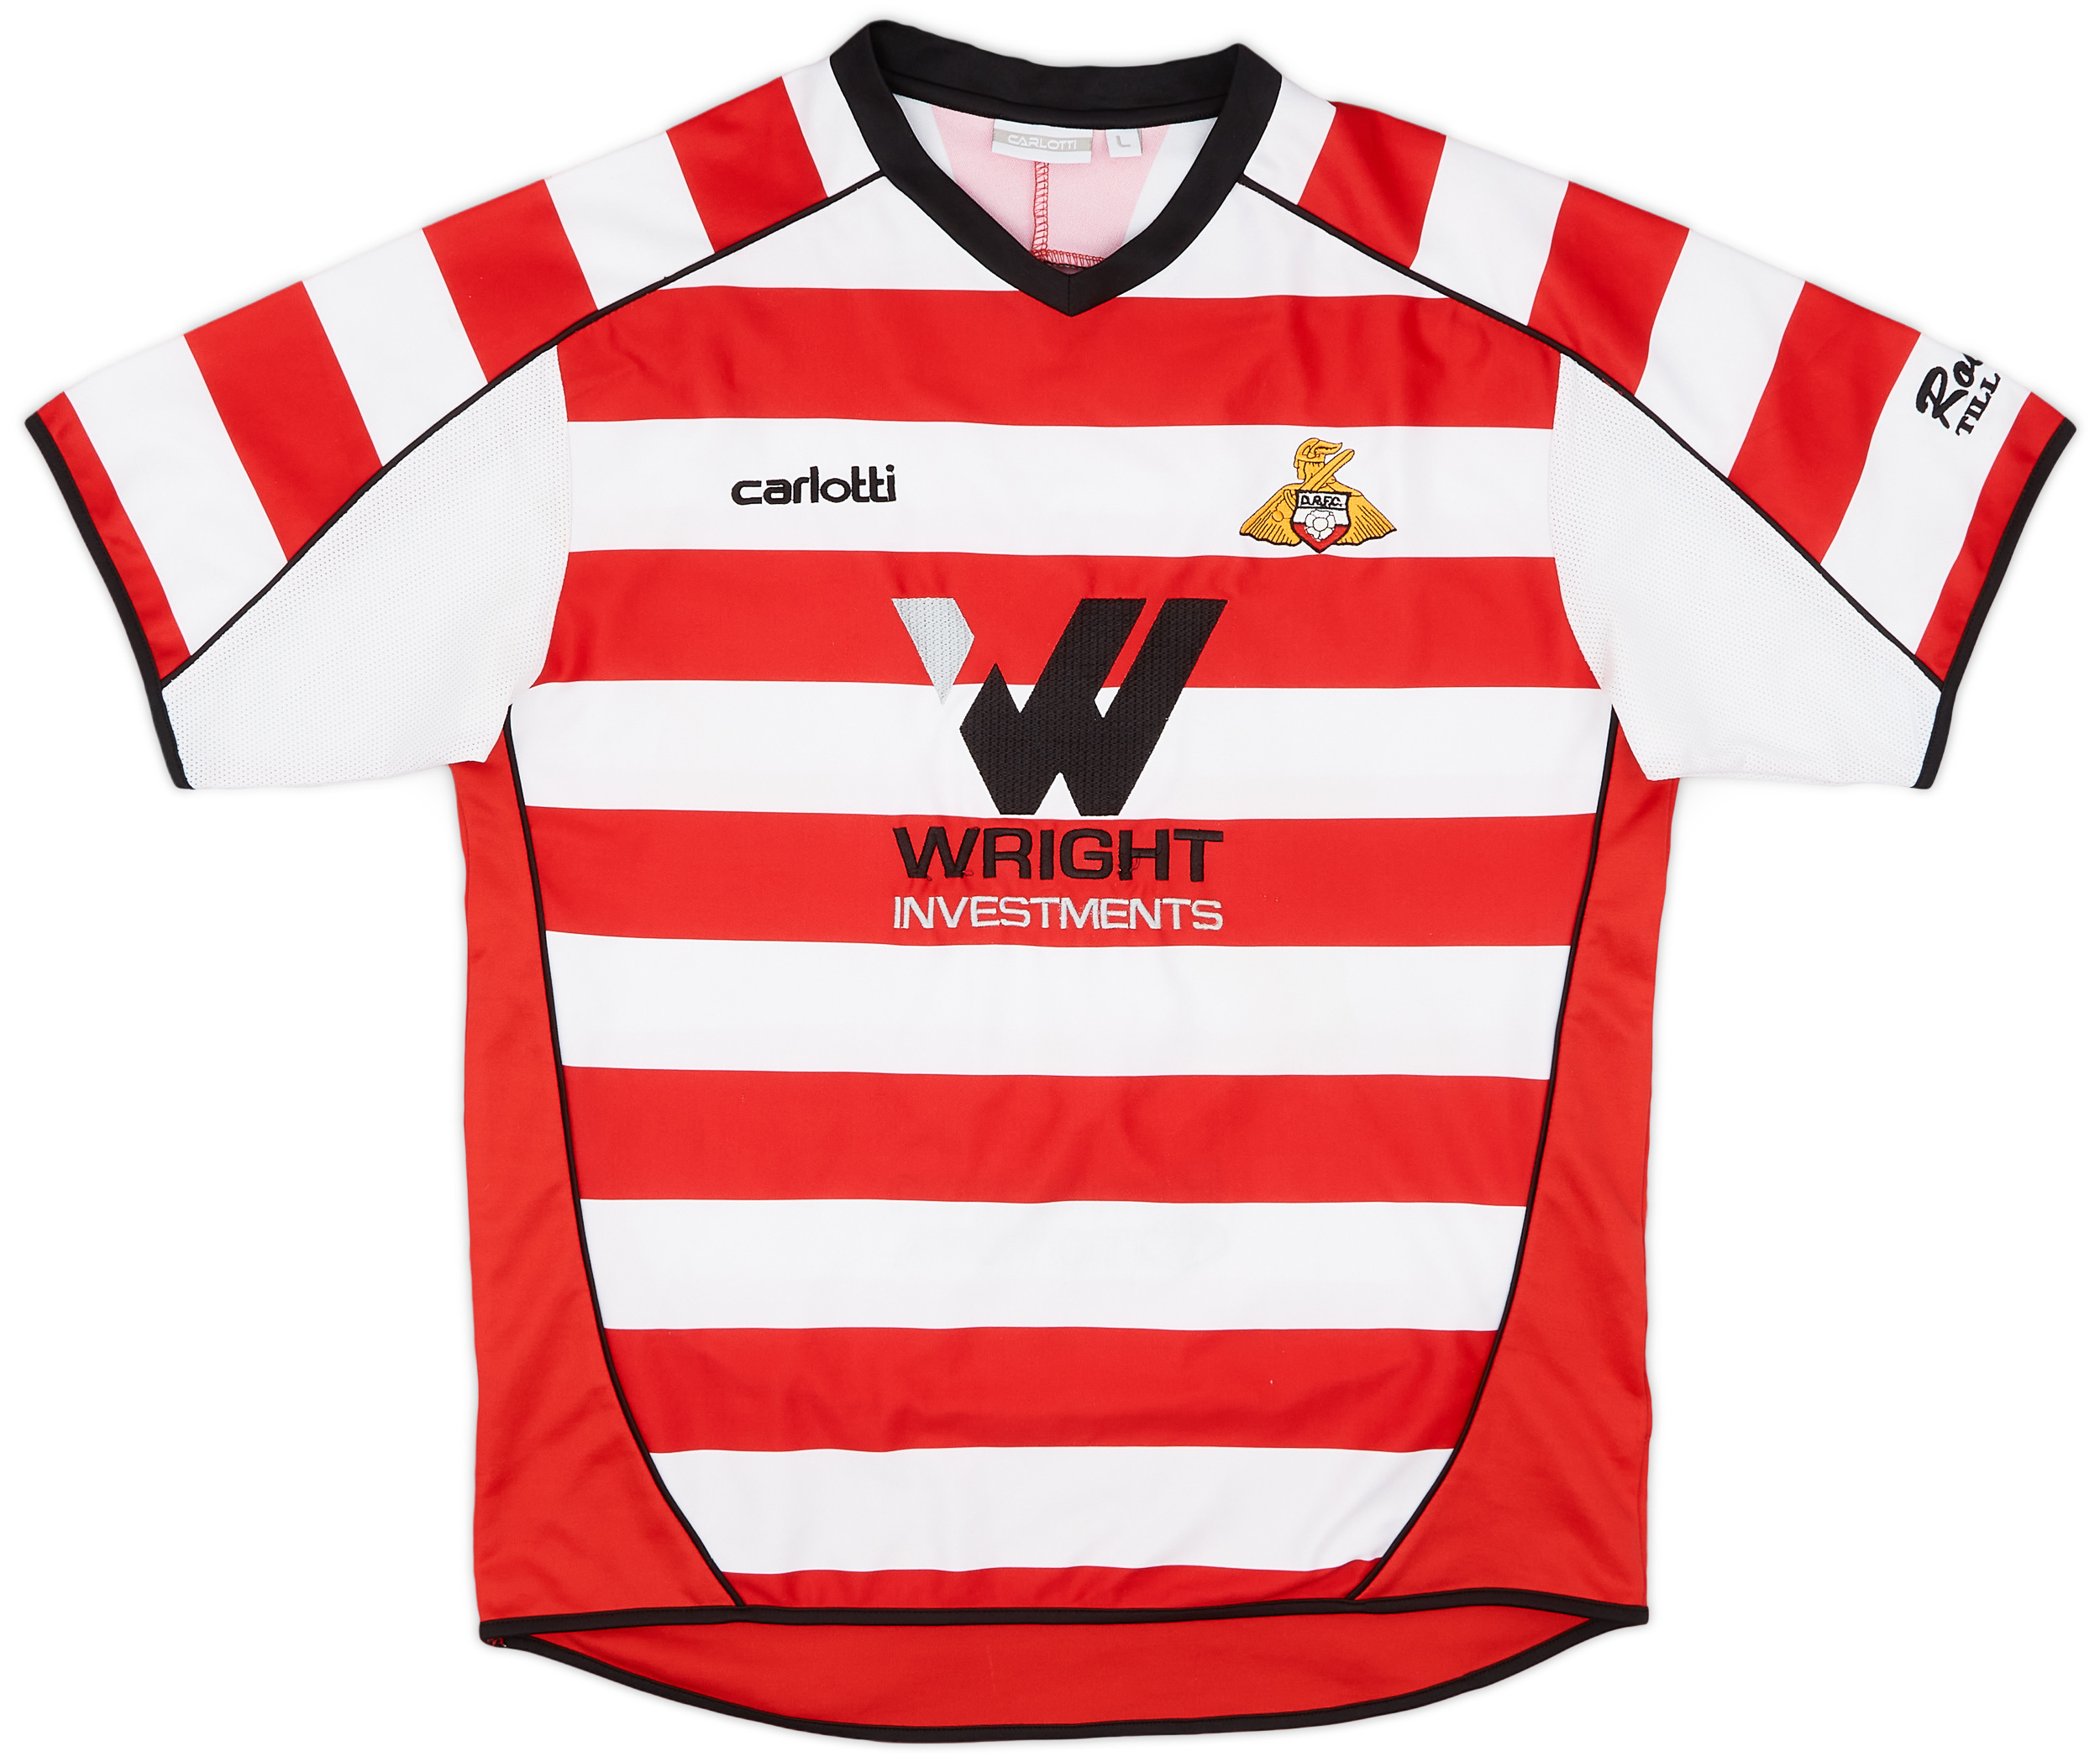 2007-08 Doncaster Rovers Home Shirt - 8/10 - ()